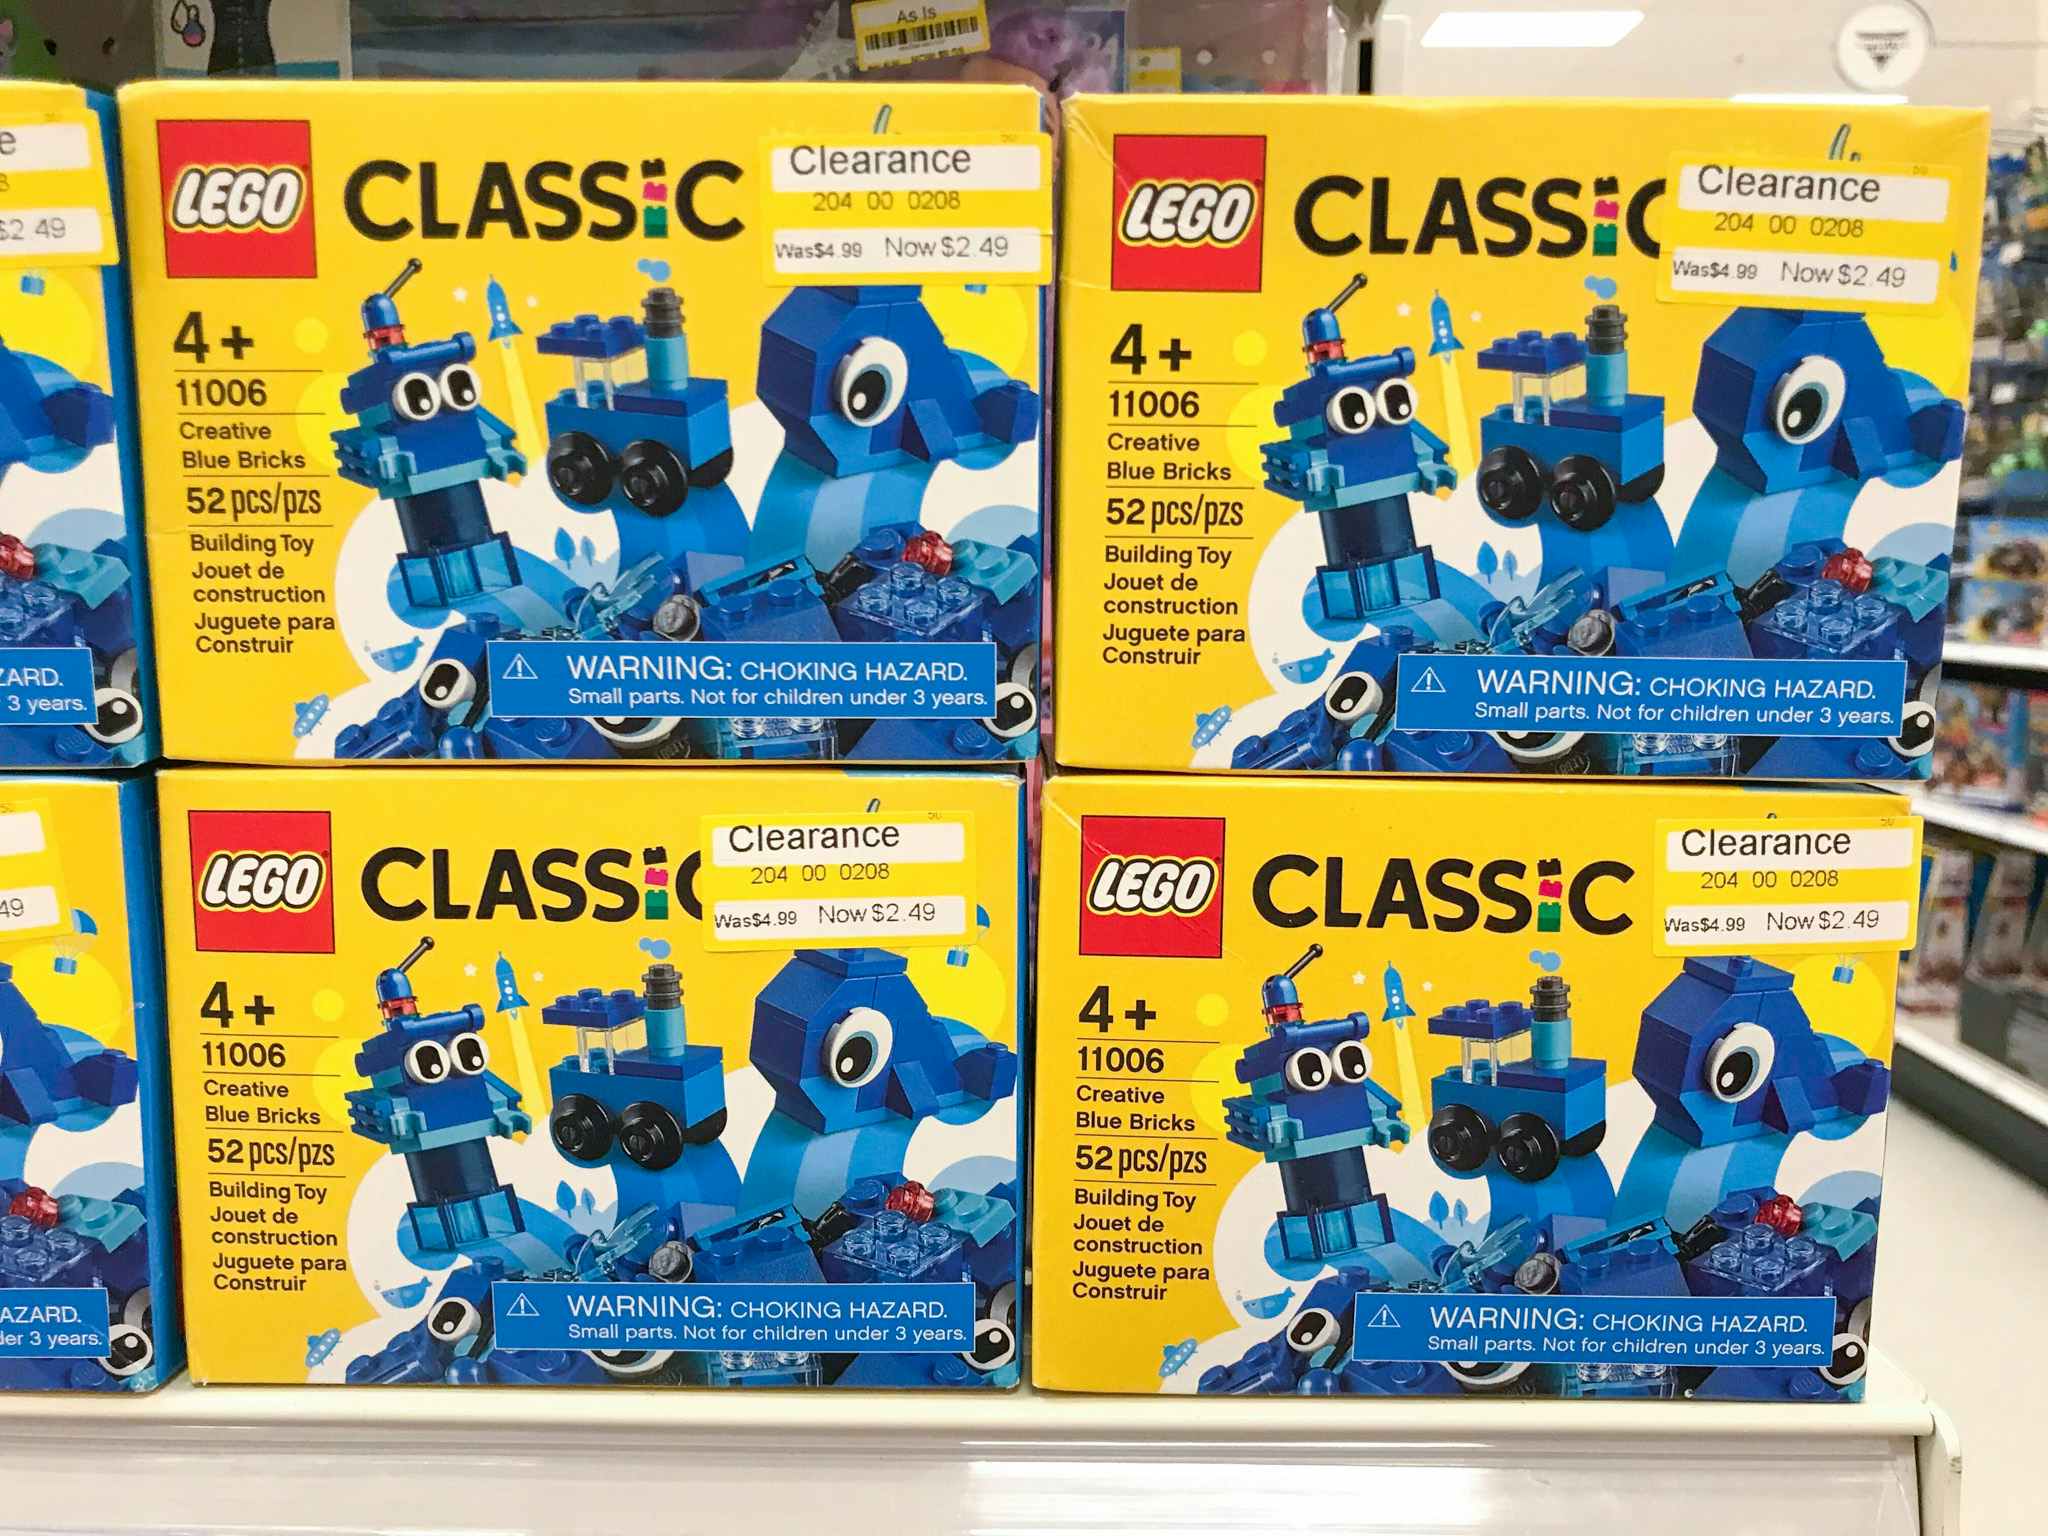 stacked boxes of LEGO sets at Target on shelf